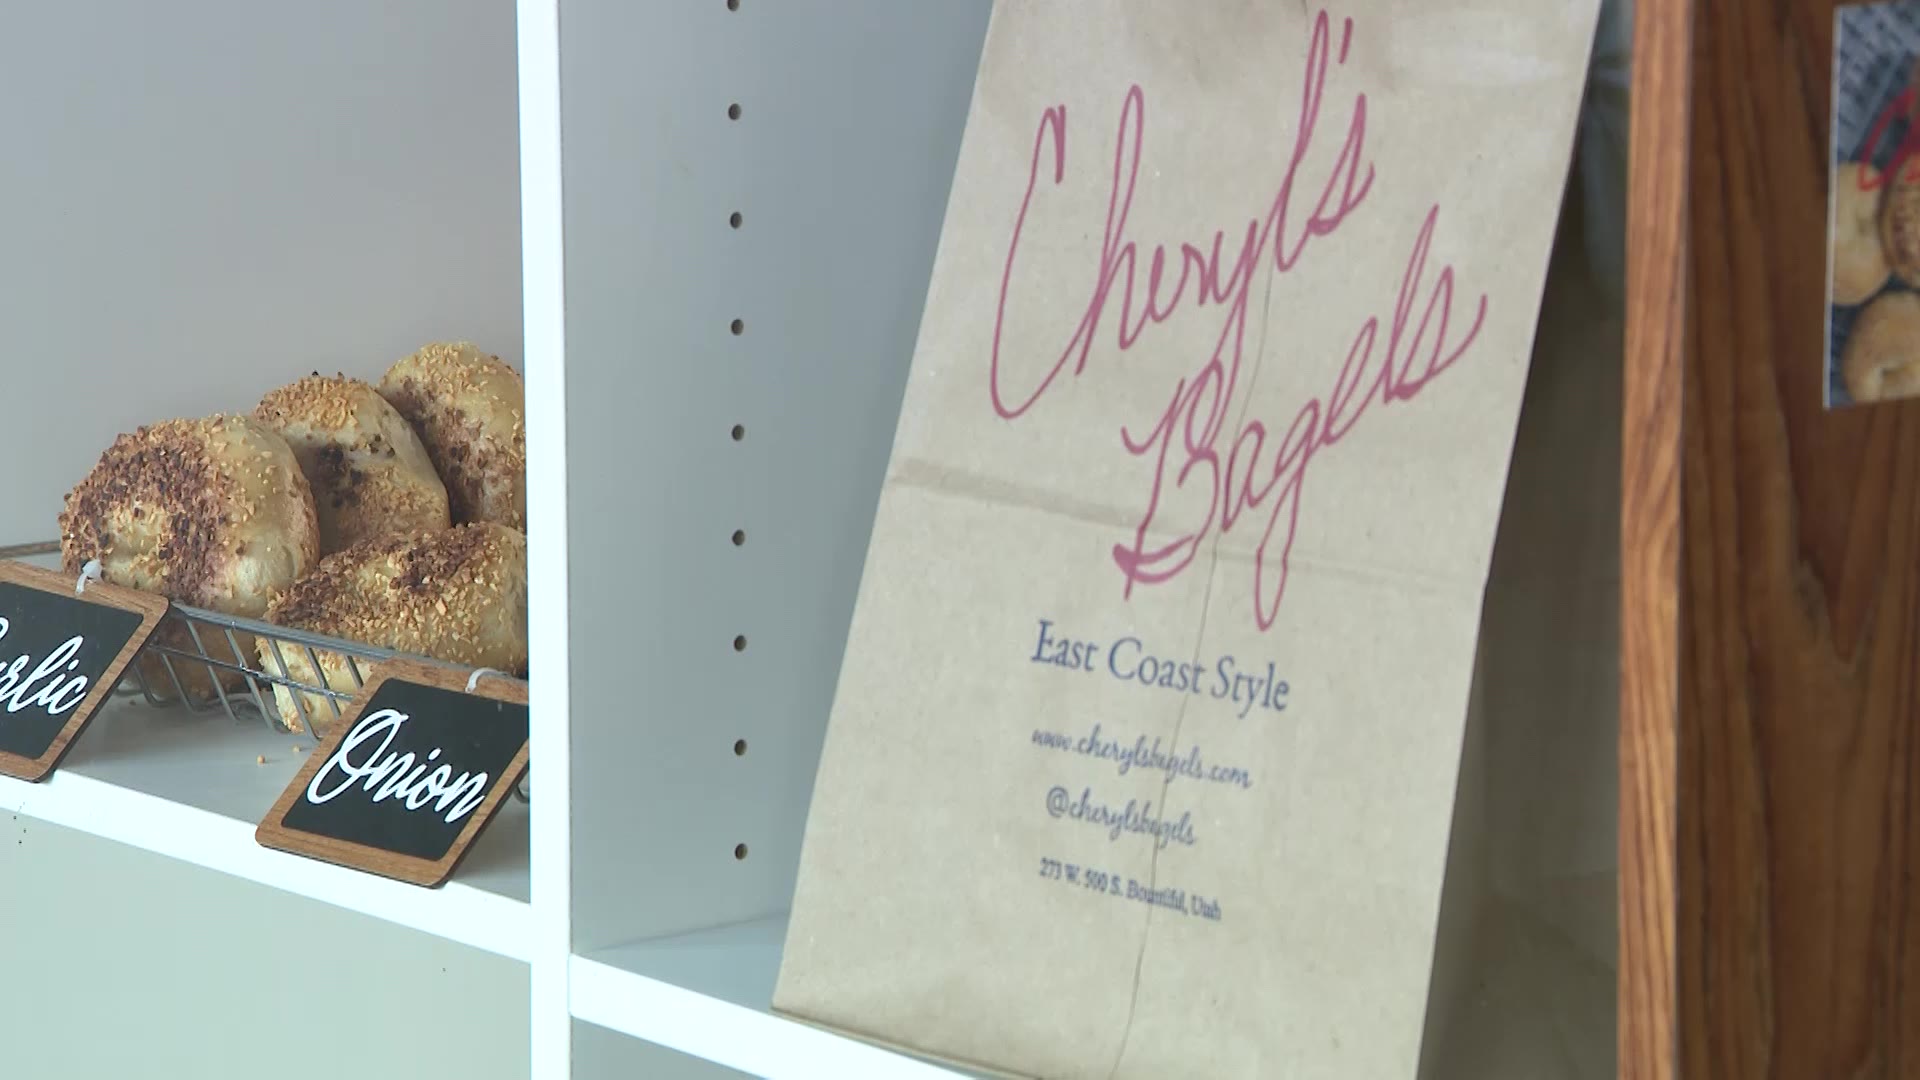 A bagel bag for "Cheryl’s Bagels East Coast Style" in Bountiful....